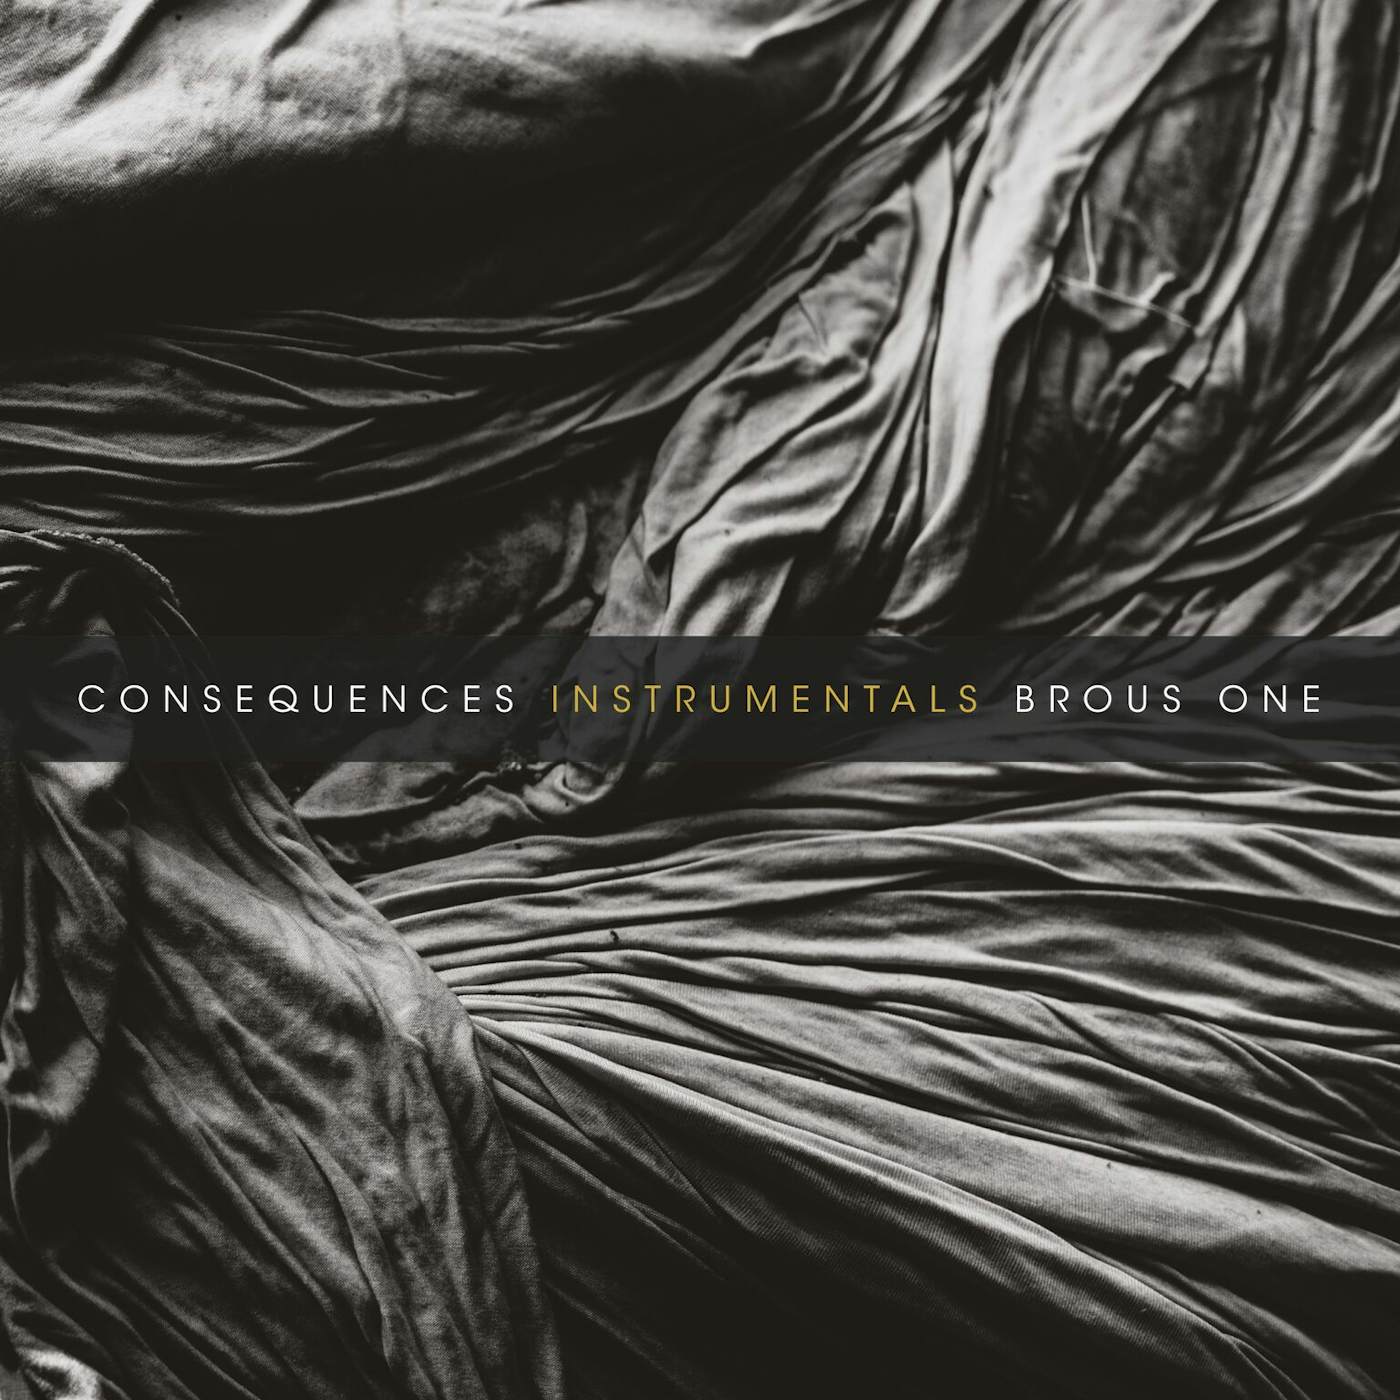 Brous One CONSEQUENCES (INSTRUMENTALS) Vinyl Record - 10 Inch Single